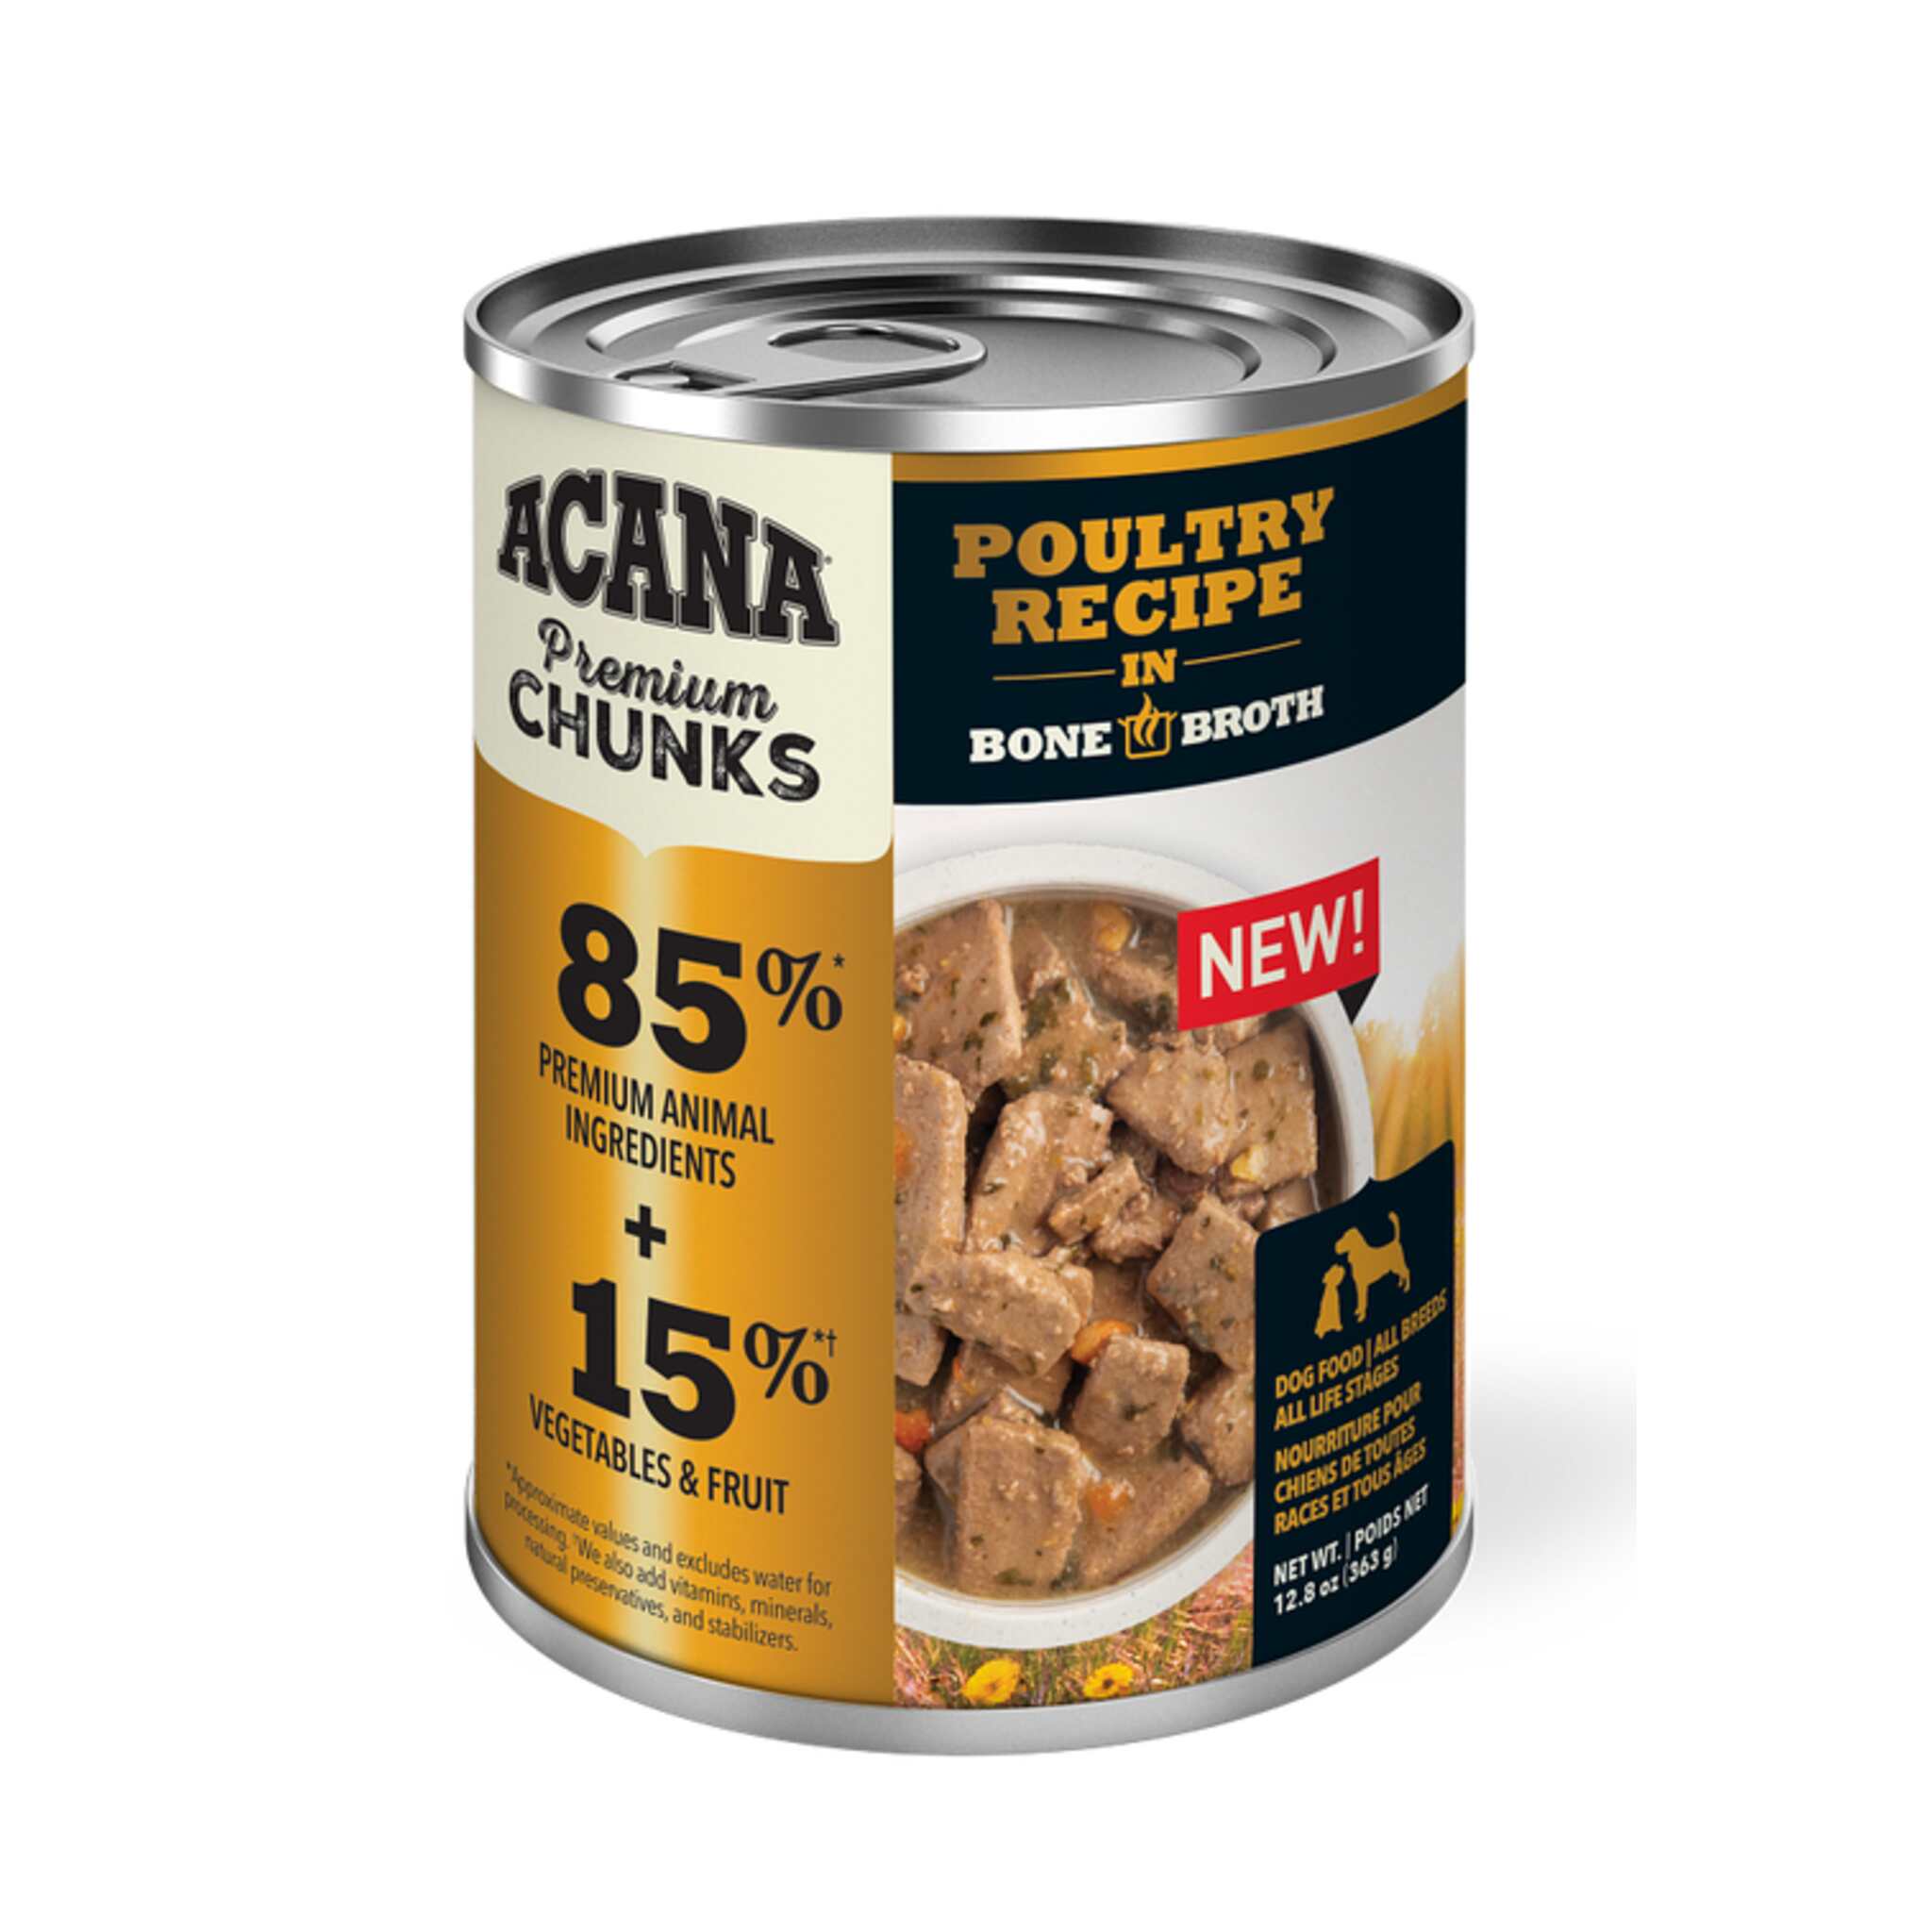 A can of Acana wet dog food, Poultry recipe, 12.8 oz.